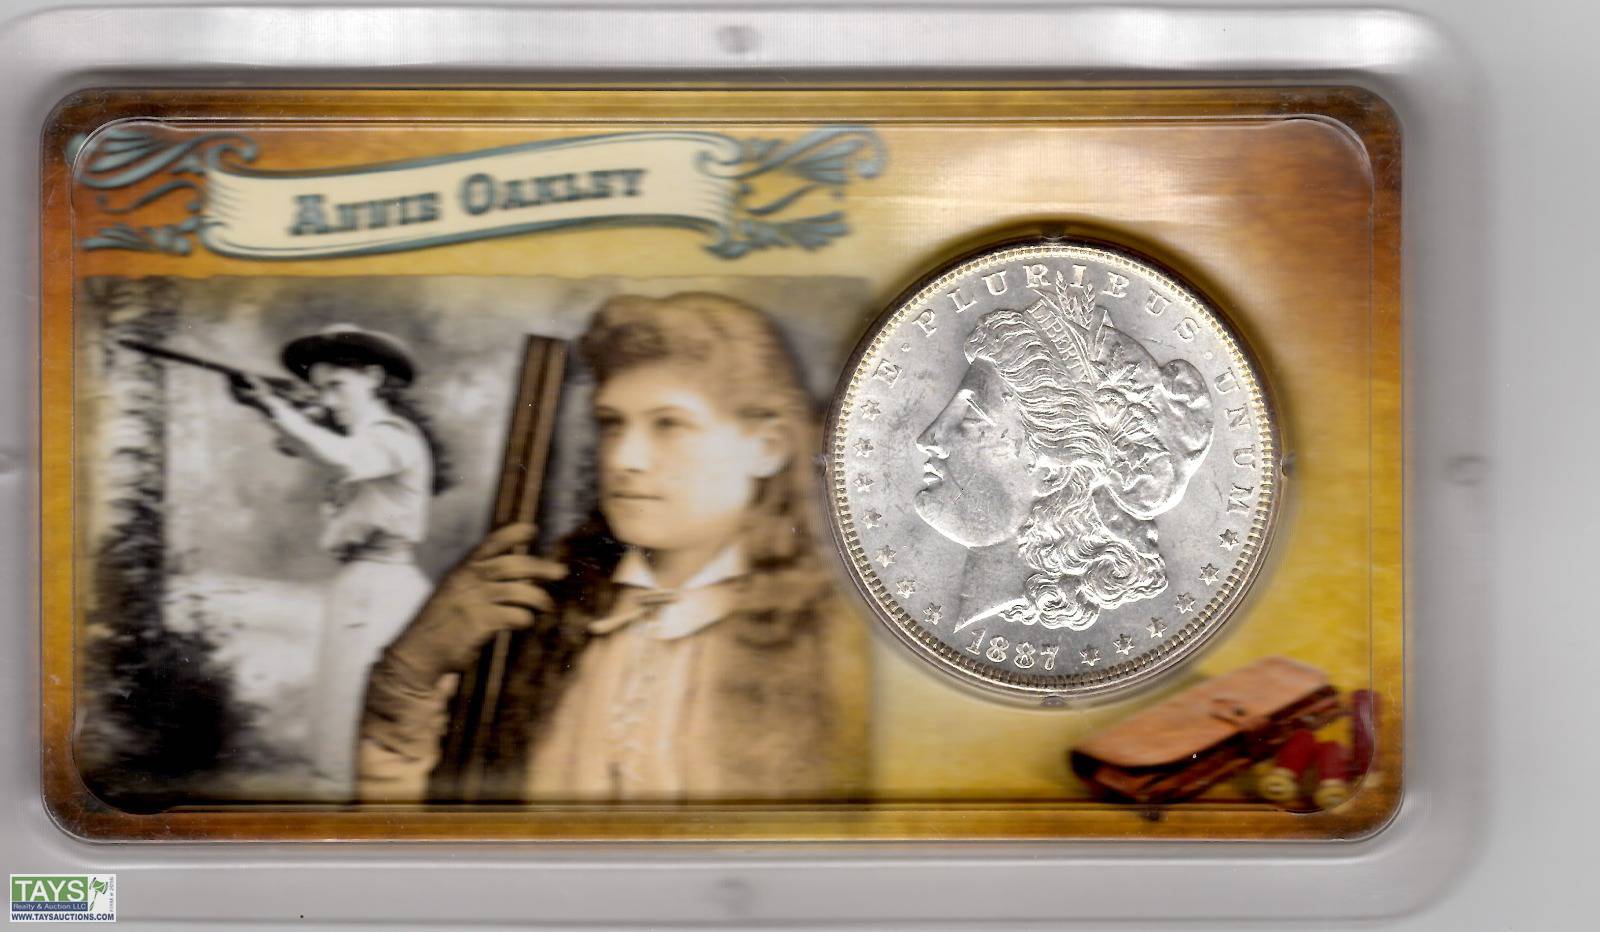 Tays Realty & Auction - Auction: ONLINE ABSOLUTE AUCTION: FIREARMS -  AMMUNITION - COINS & SPORTING GOODS ITEM: 1887 Choice Uncirculated Morgan  Silver Dollar 